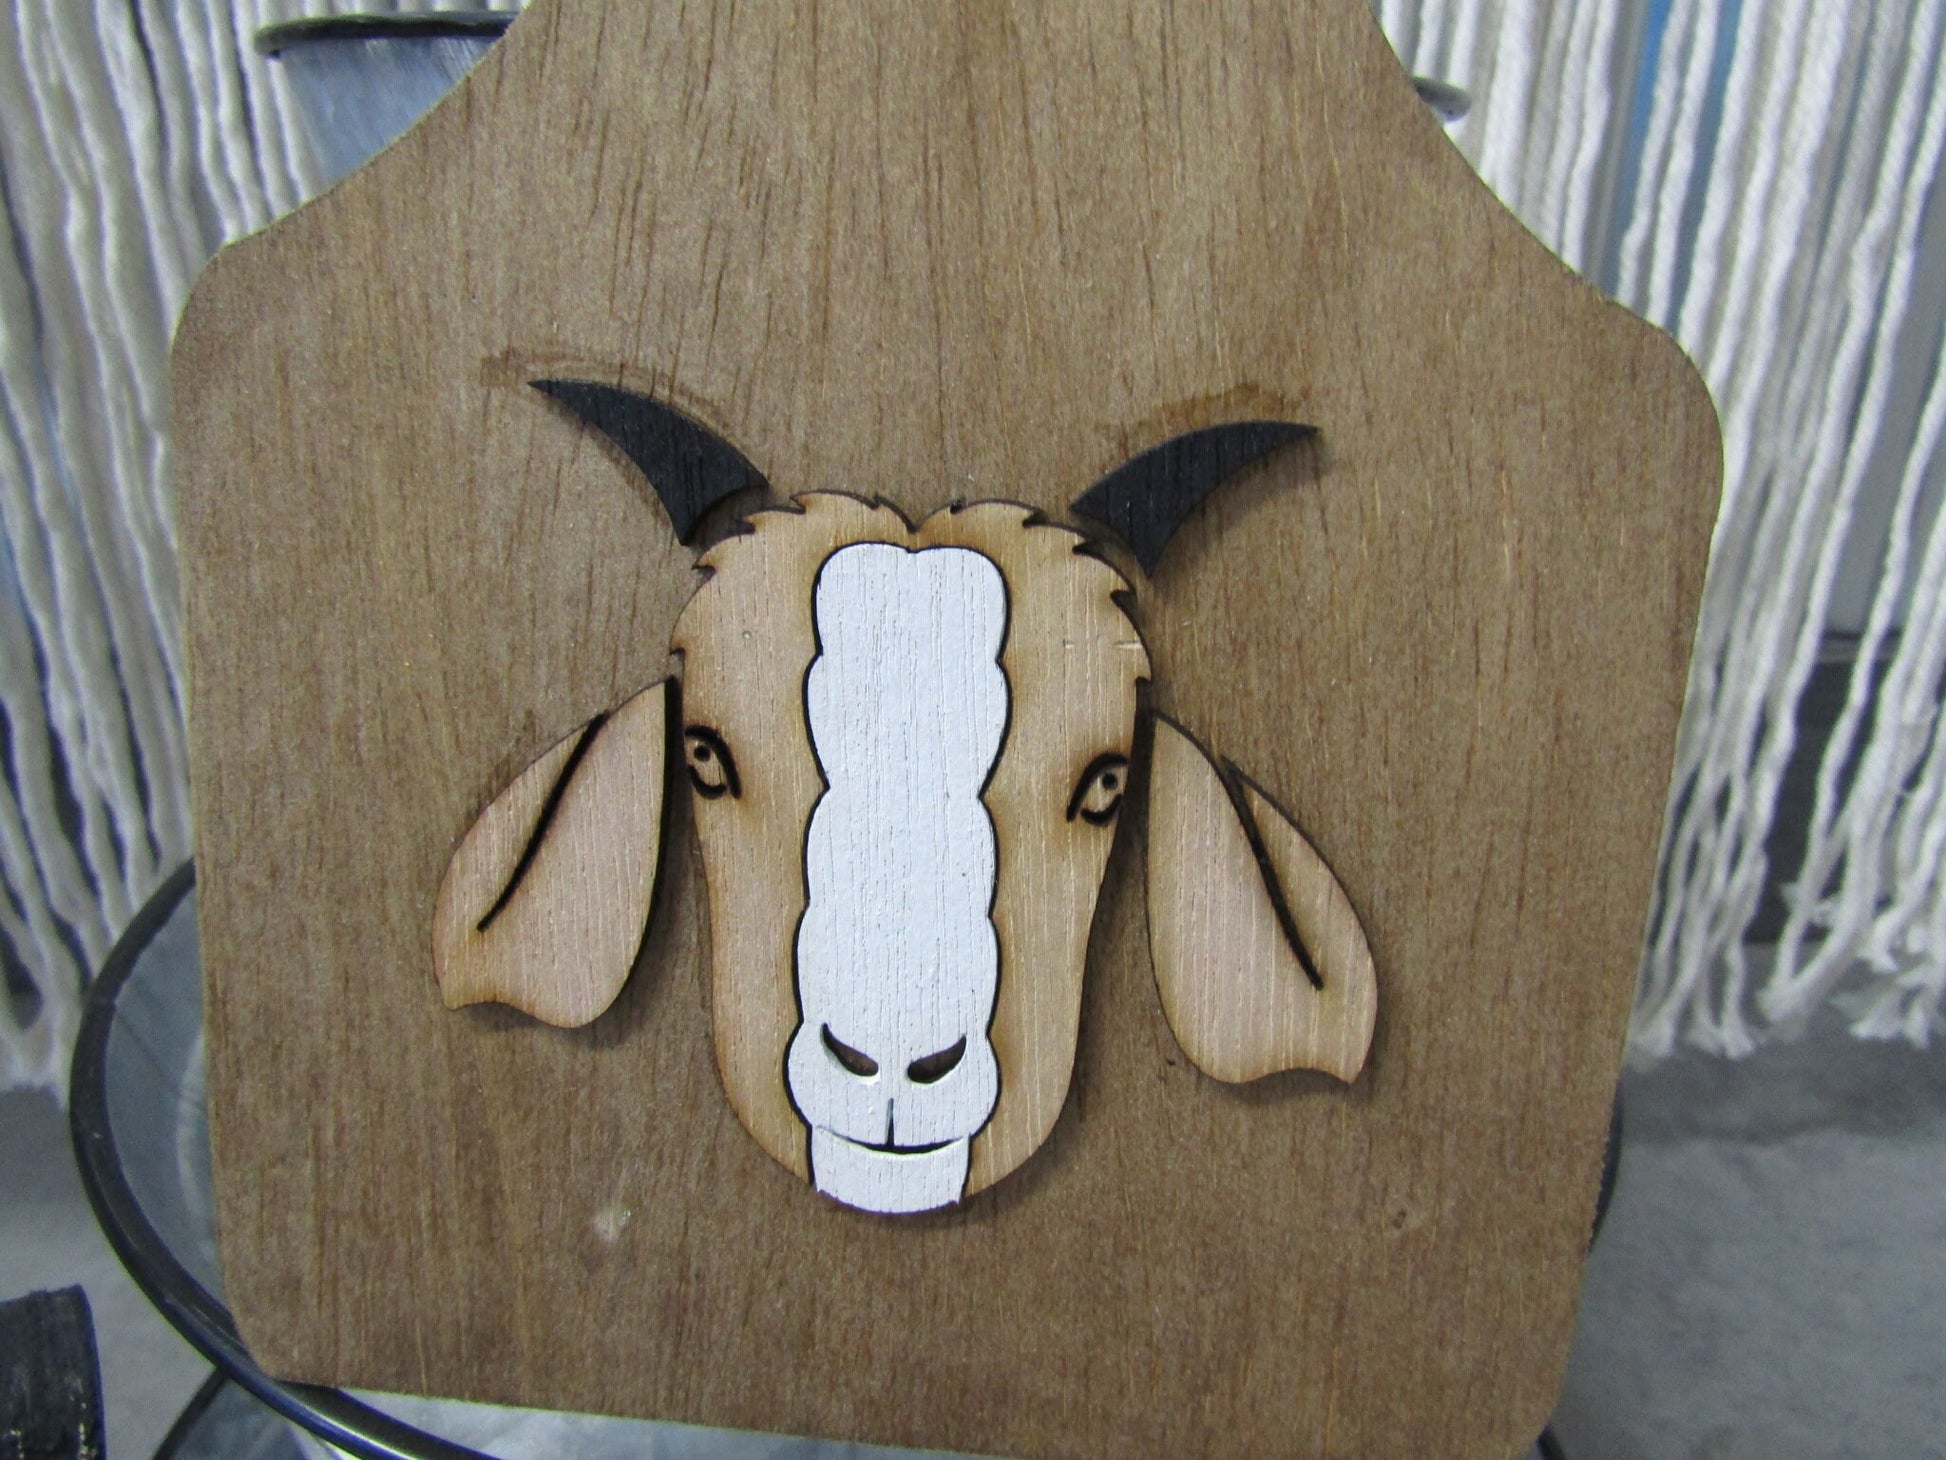 Farm Animal Goat Wooden Ear Tag Teir Tray Decor Farmhouse Decor Blank Natural Wood Small Rustic Country Style Decoration Livestock Kitchen